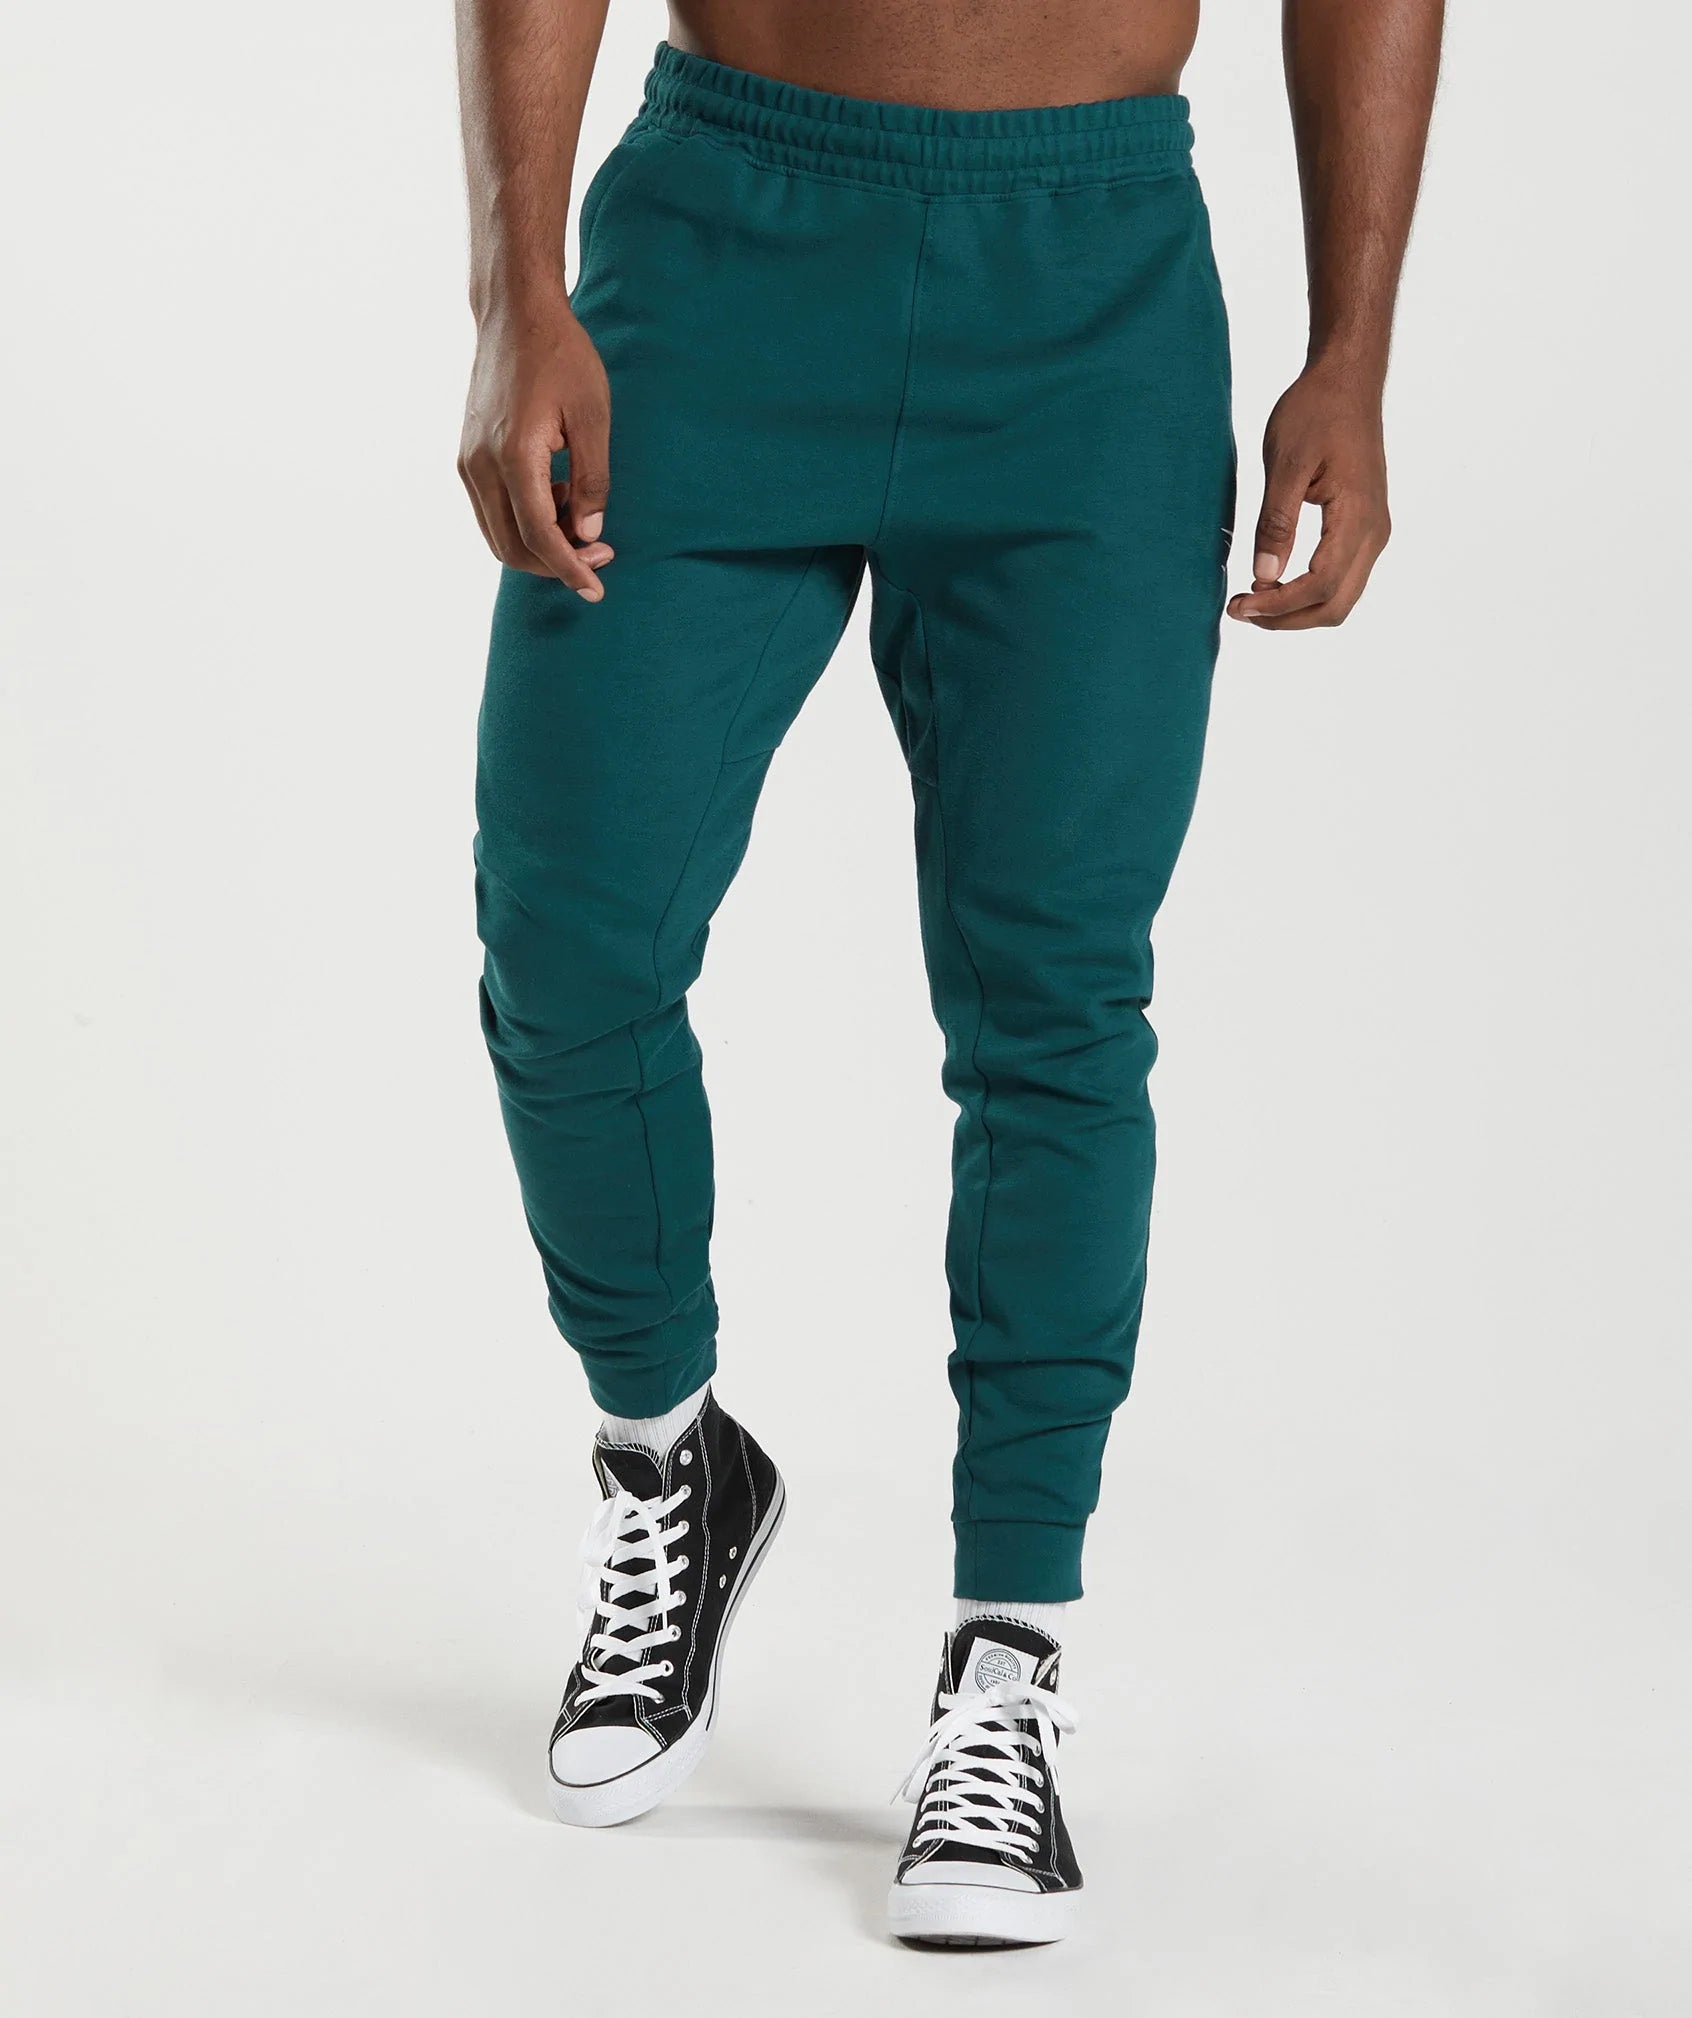 React Joggers in Winter Teal - view 1